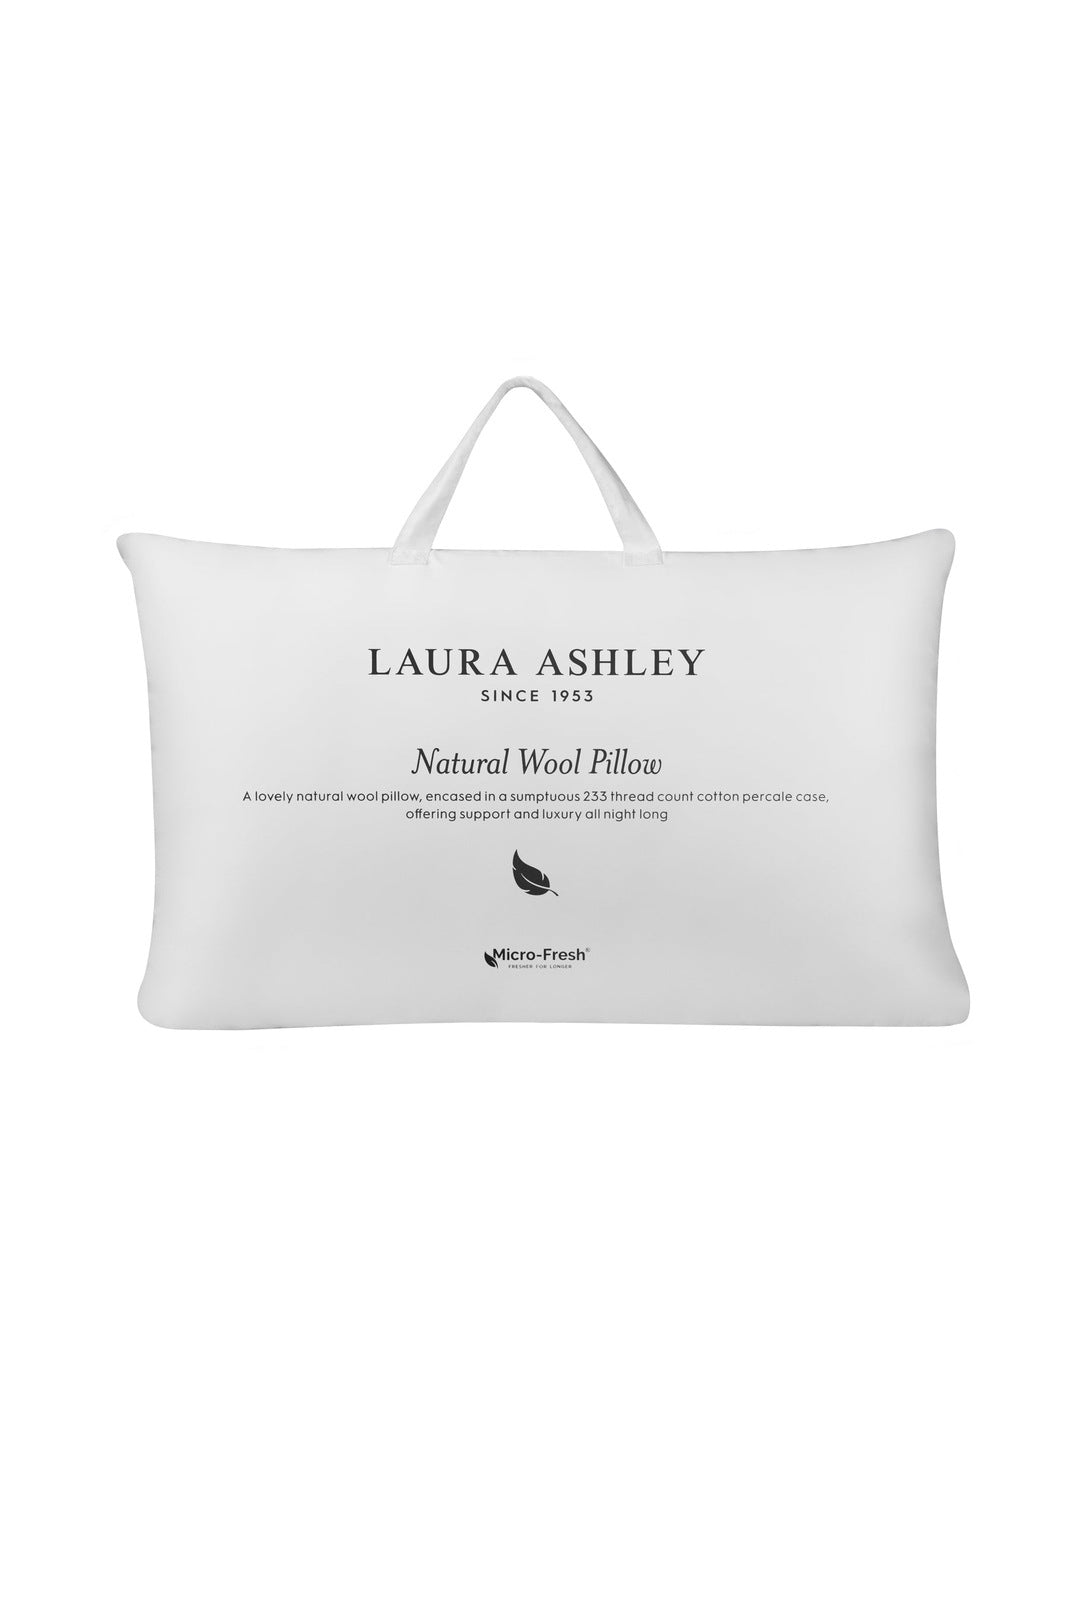 Laura Ashley Wool Pillow 1 Shaws Department Stores